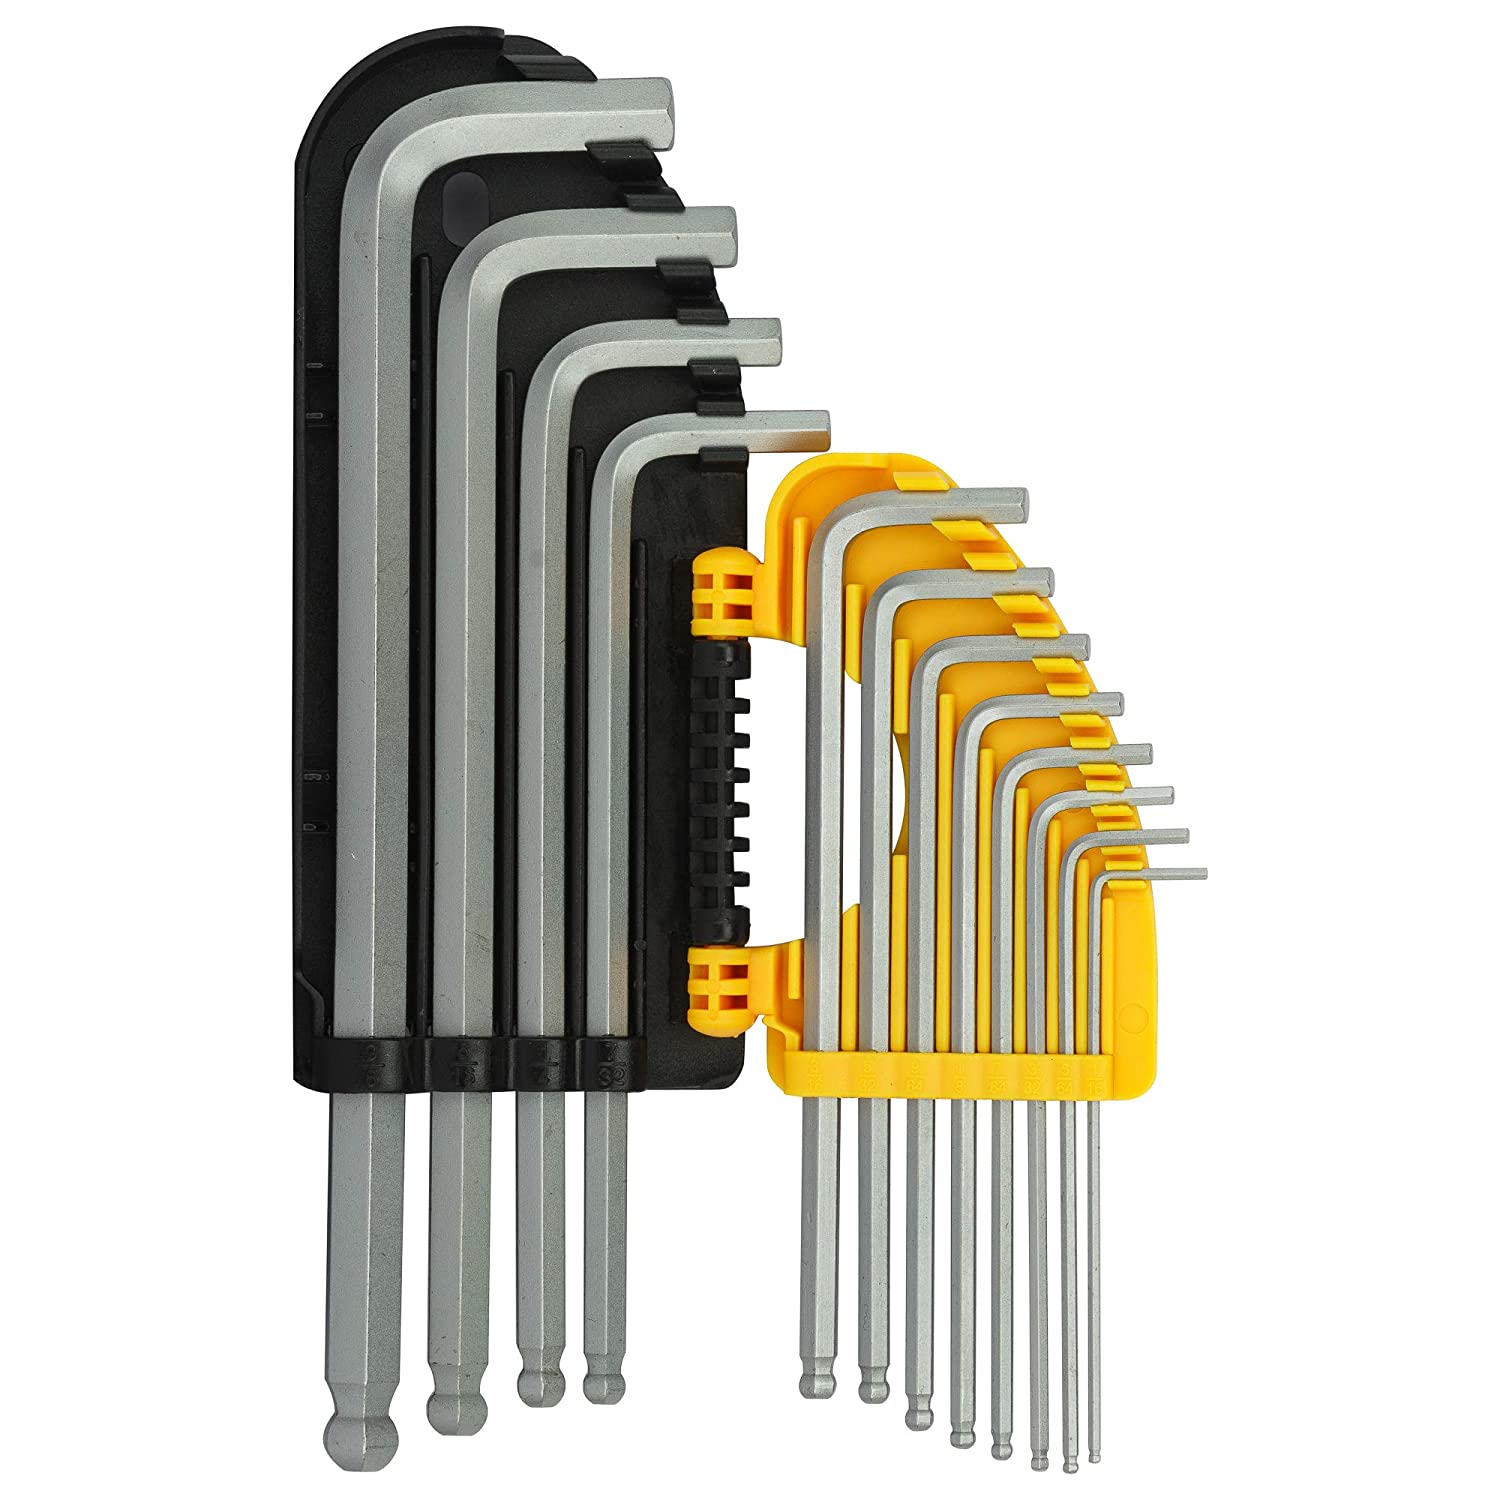 STANLEY 94-163-23 12PC. LONG BALL POINT HEX KEY